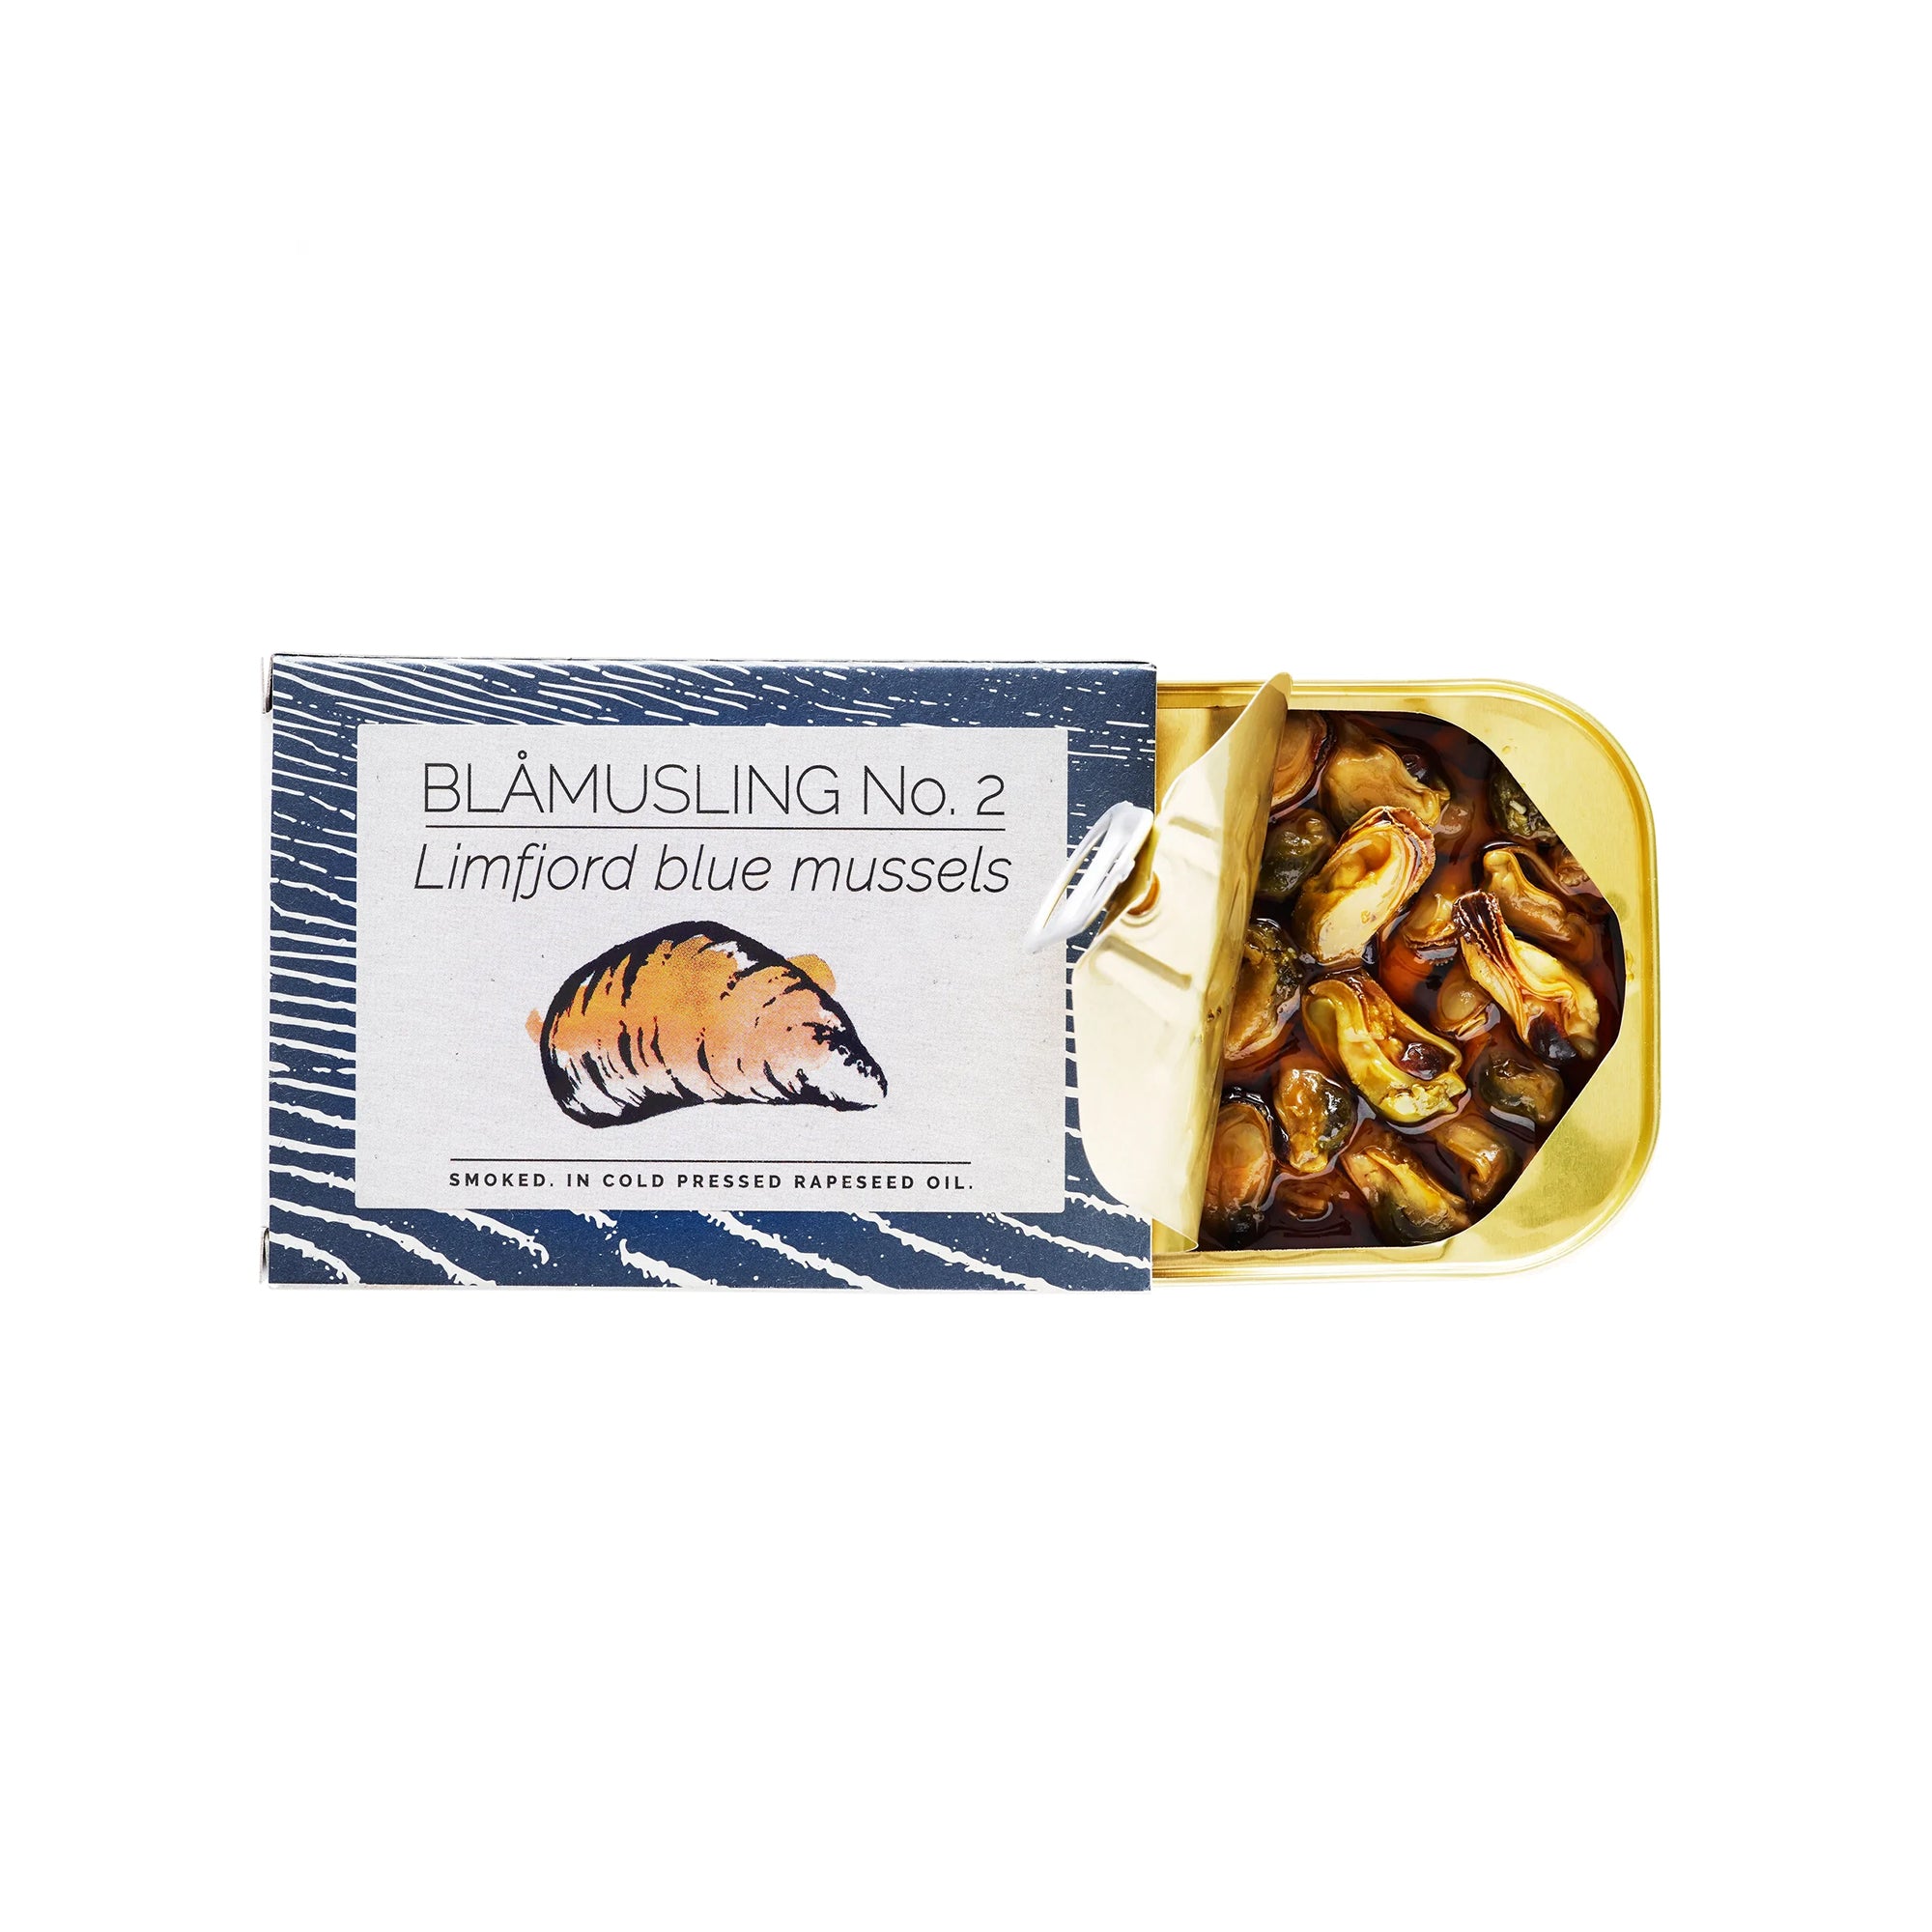 Blåmuslinger No. 2 Limfjord Blue Mussels Smoked in Cold Pressed Rapeseed Oil